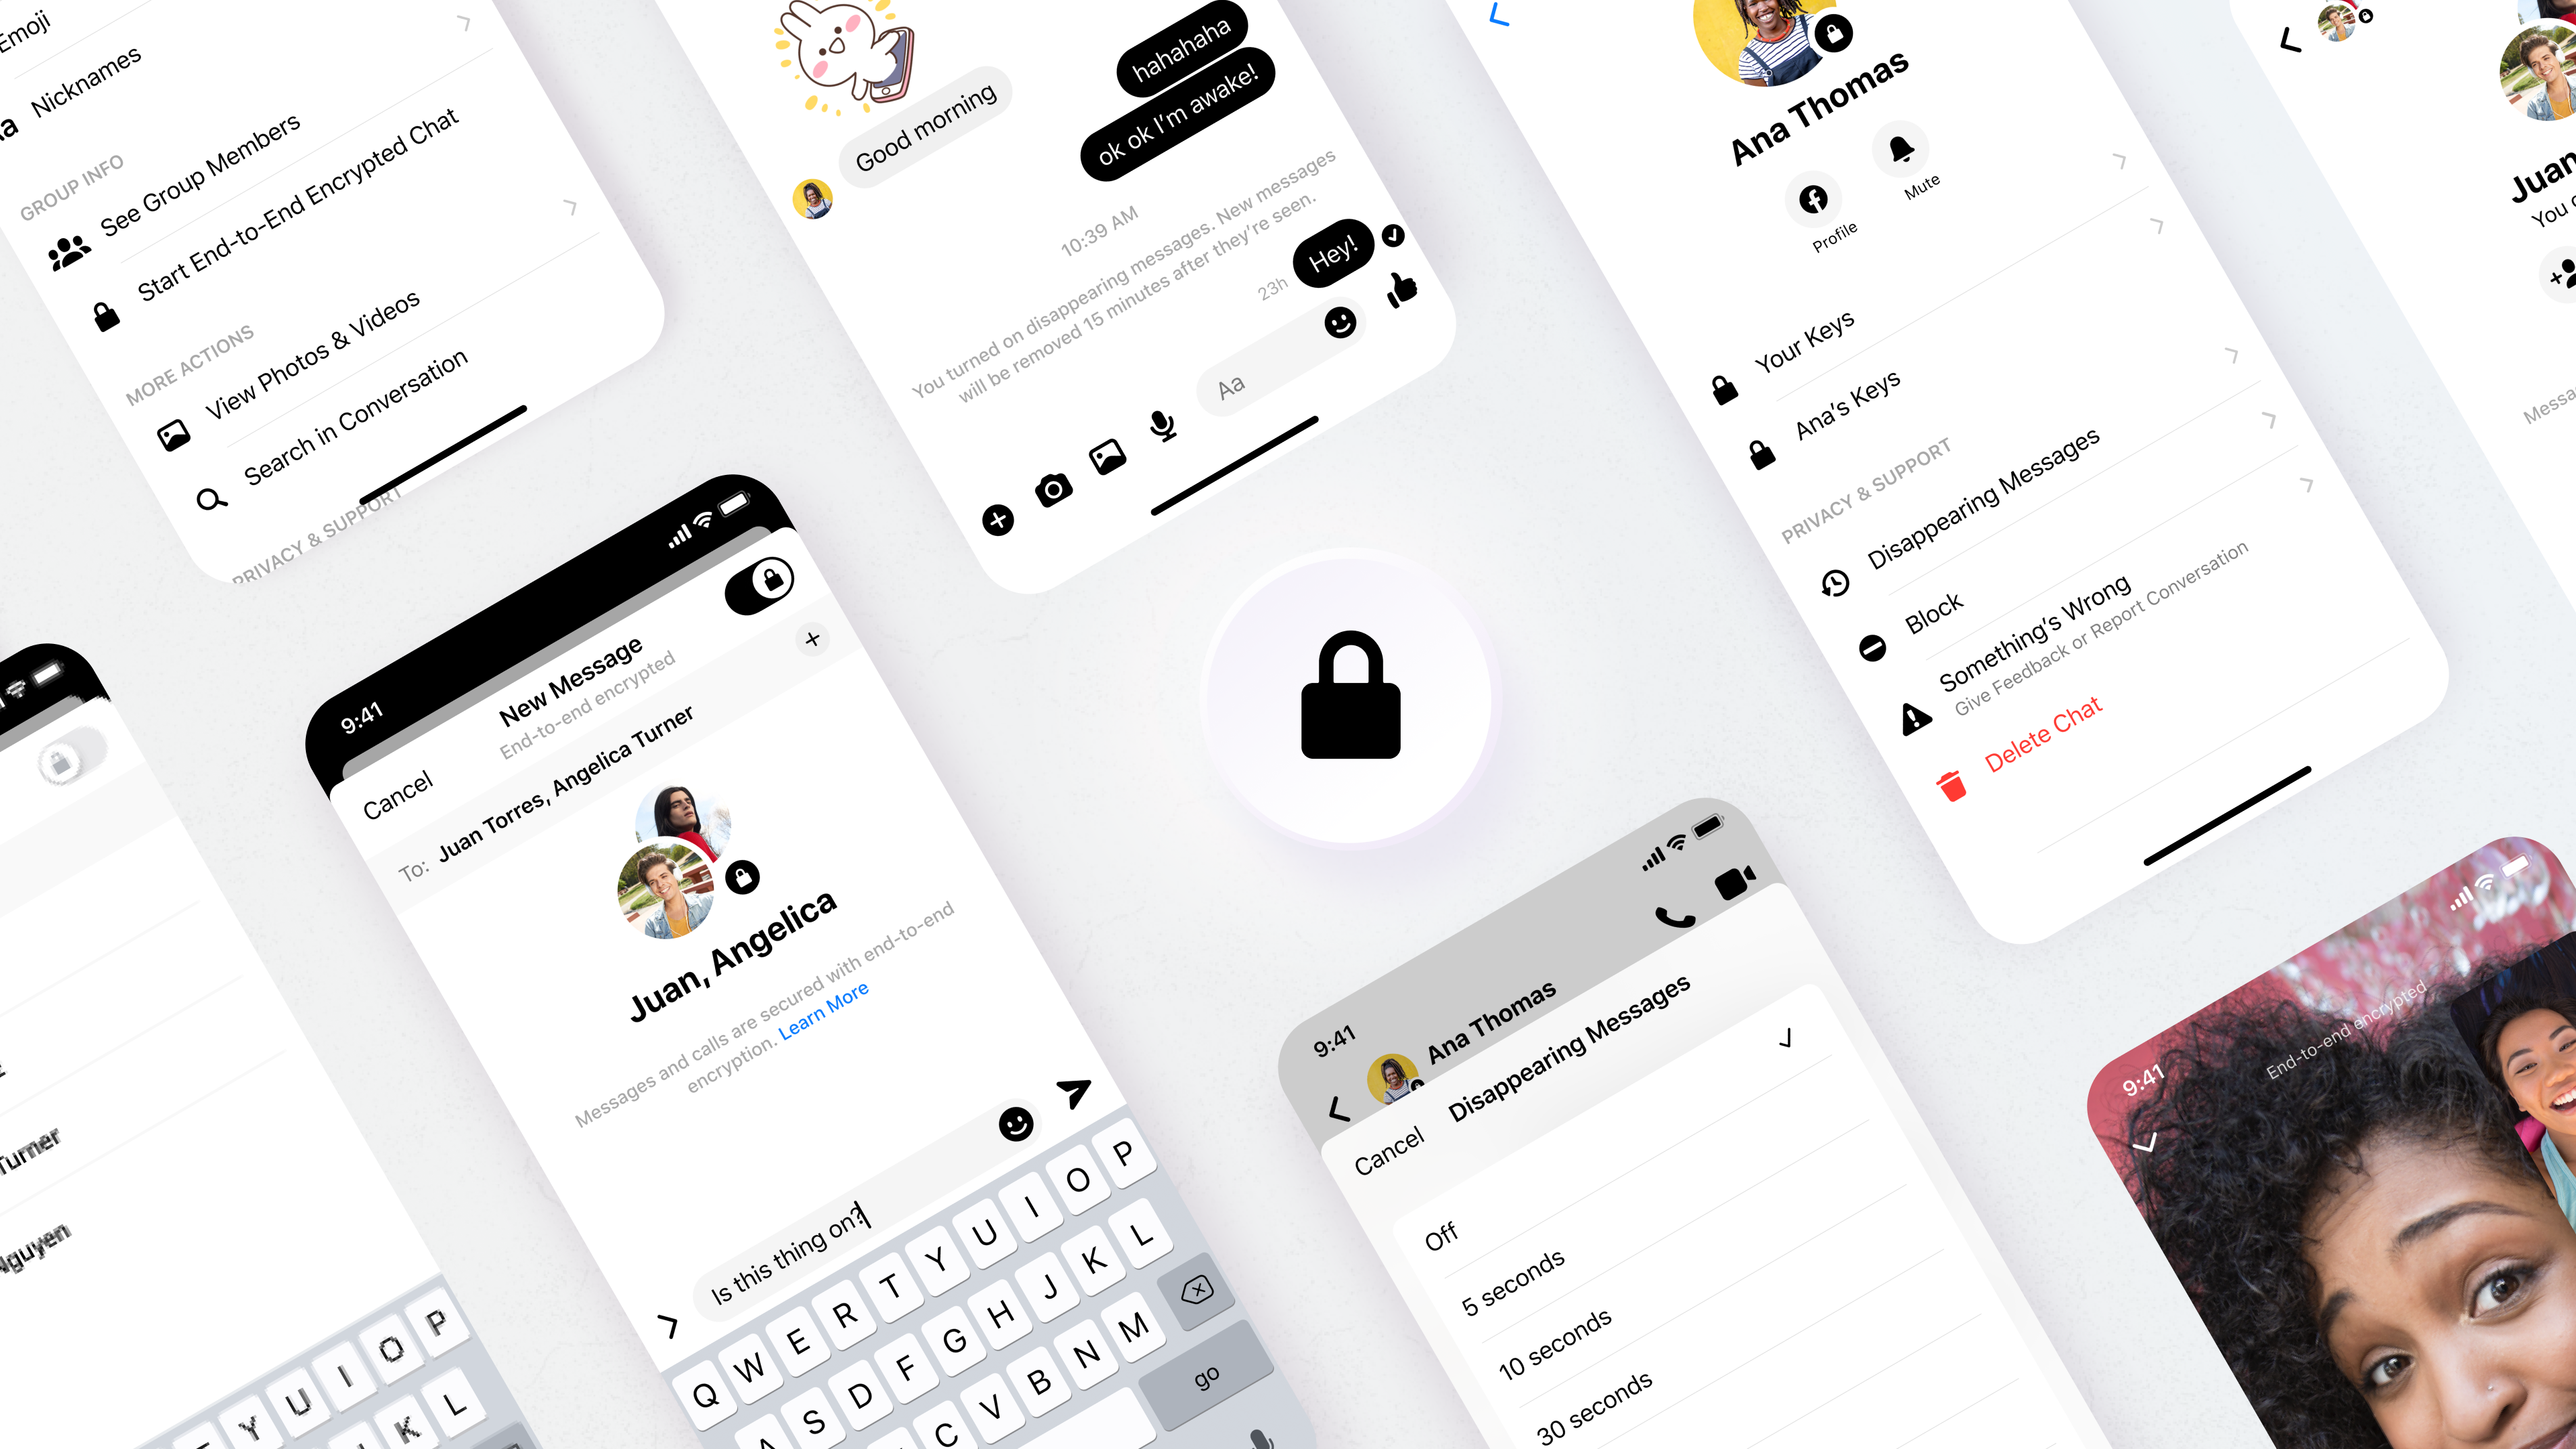 Encrypted chat voice free to download end end Facebook Messenger